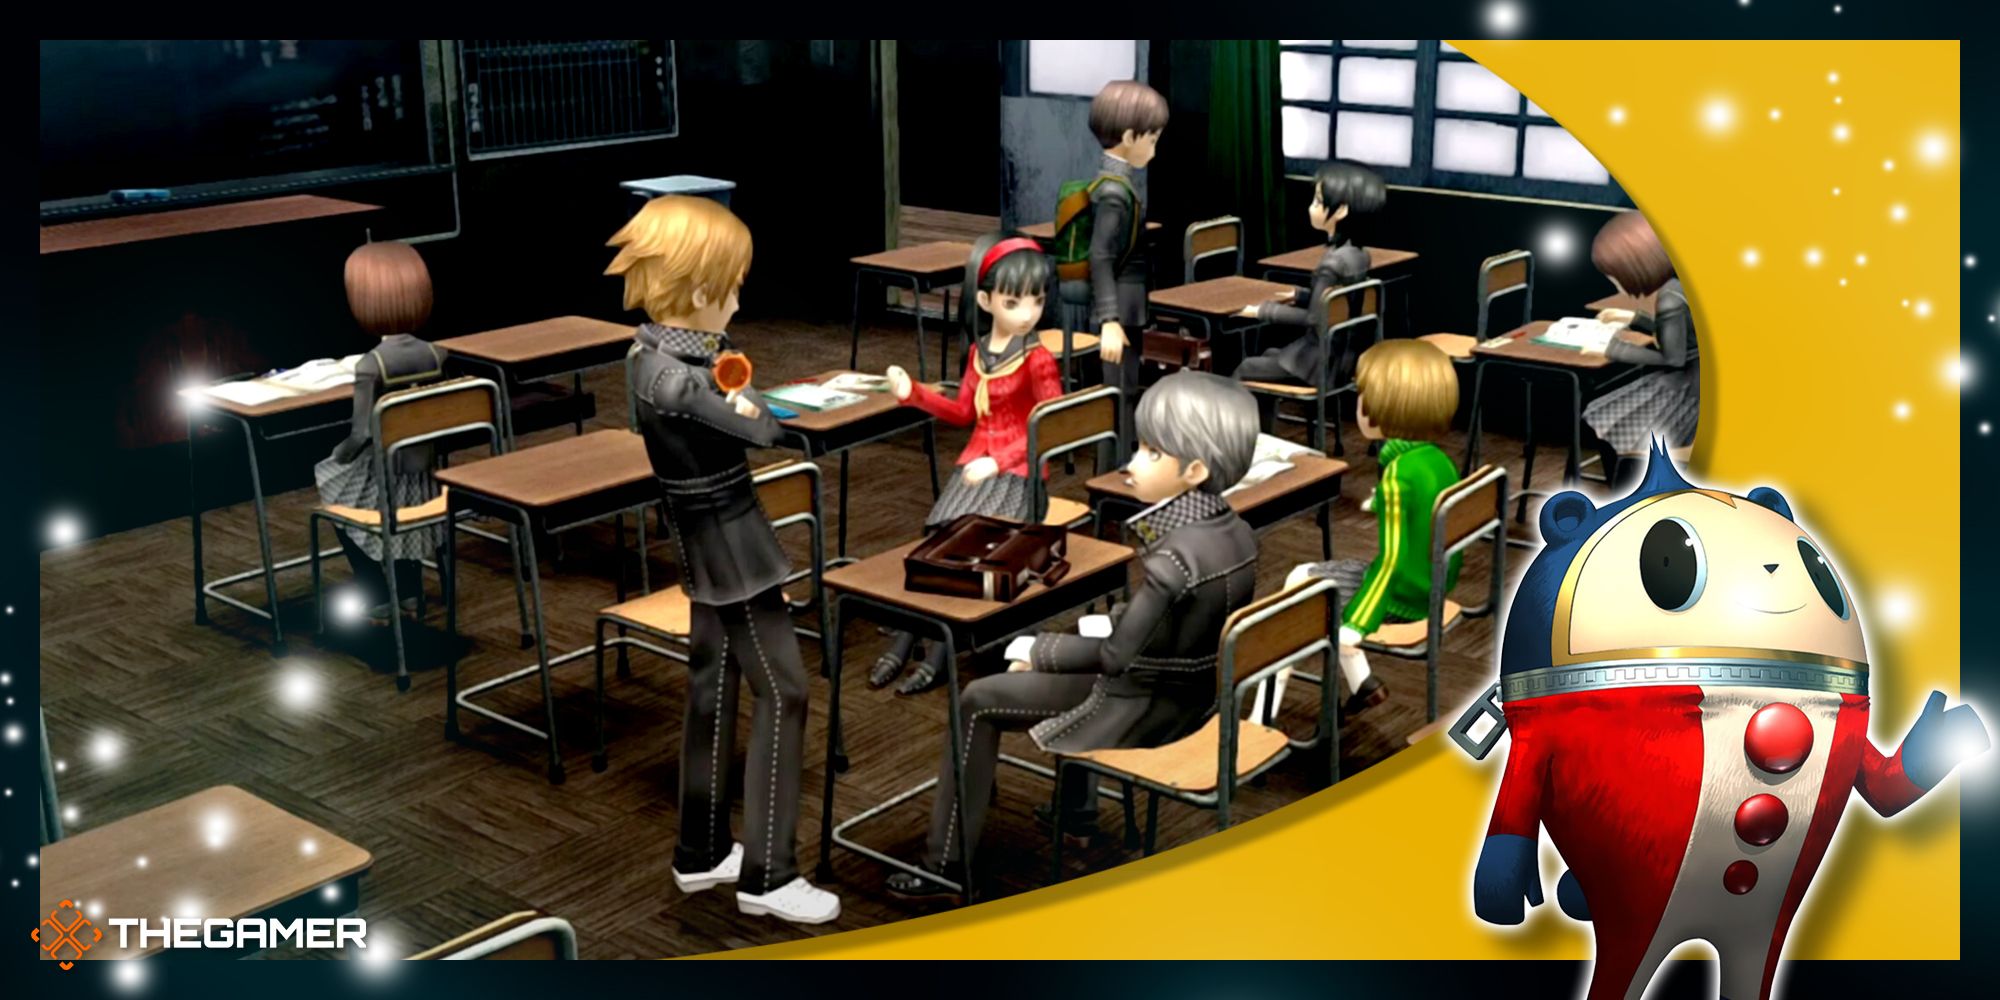 Persona 4 Golden - Yosuke, Yukiko, Chie, and Yu all chatting in class with a Teddie overlay in the corner.